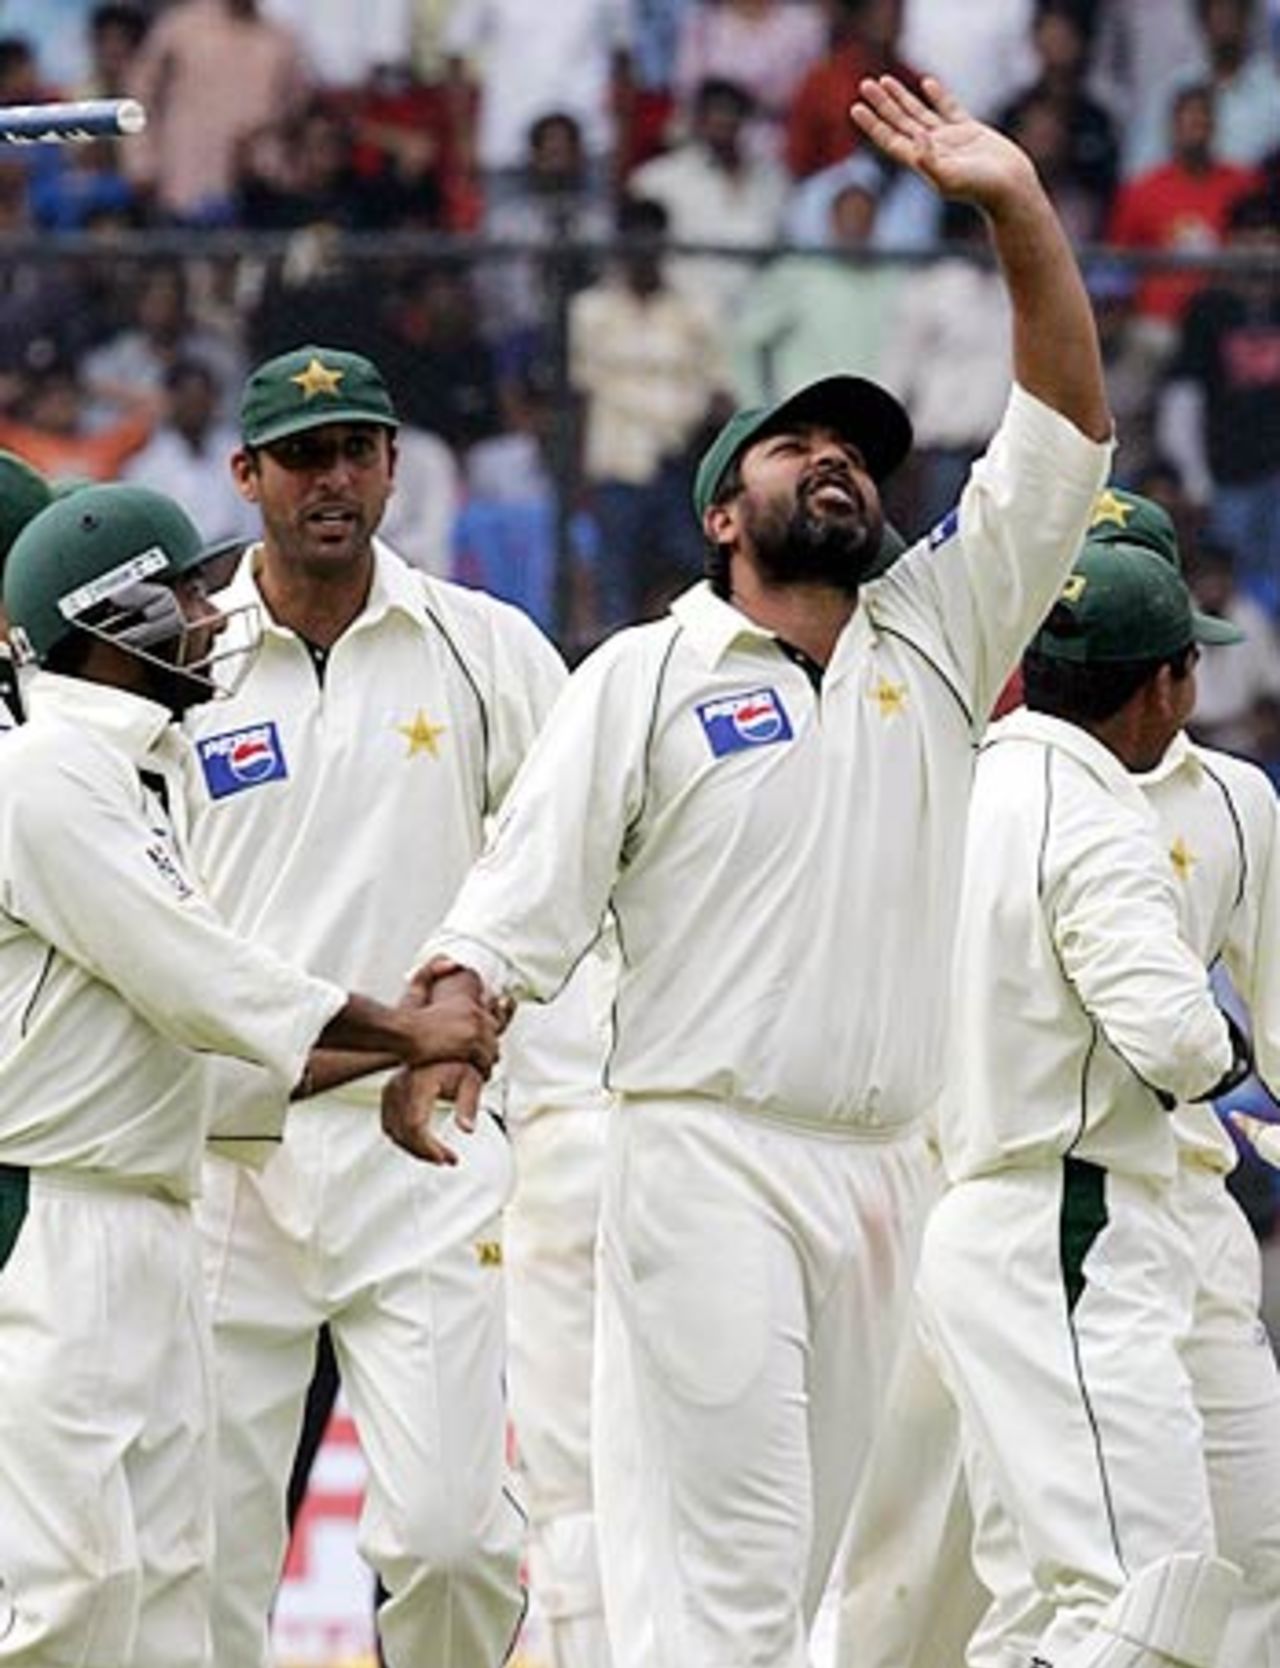 Pakistan team jubiliant after levelling the series 1-1, India v Pakistan, 3rd Test, Bangalore, 5th day, March 28, 2005